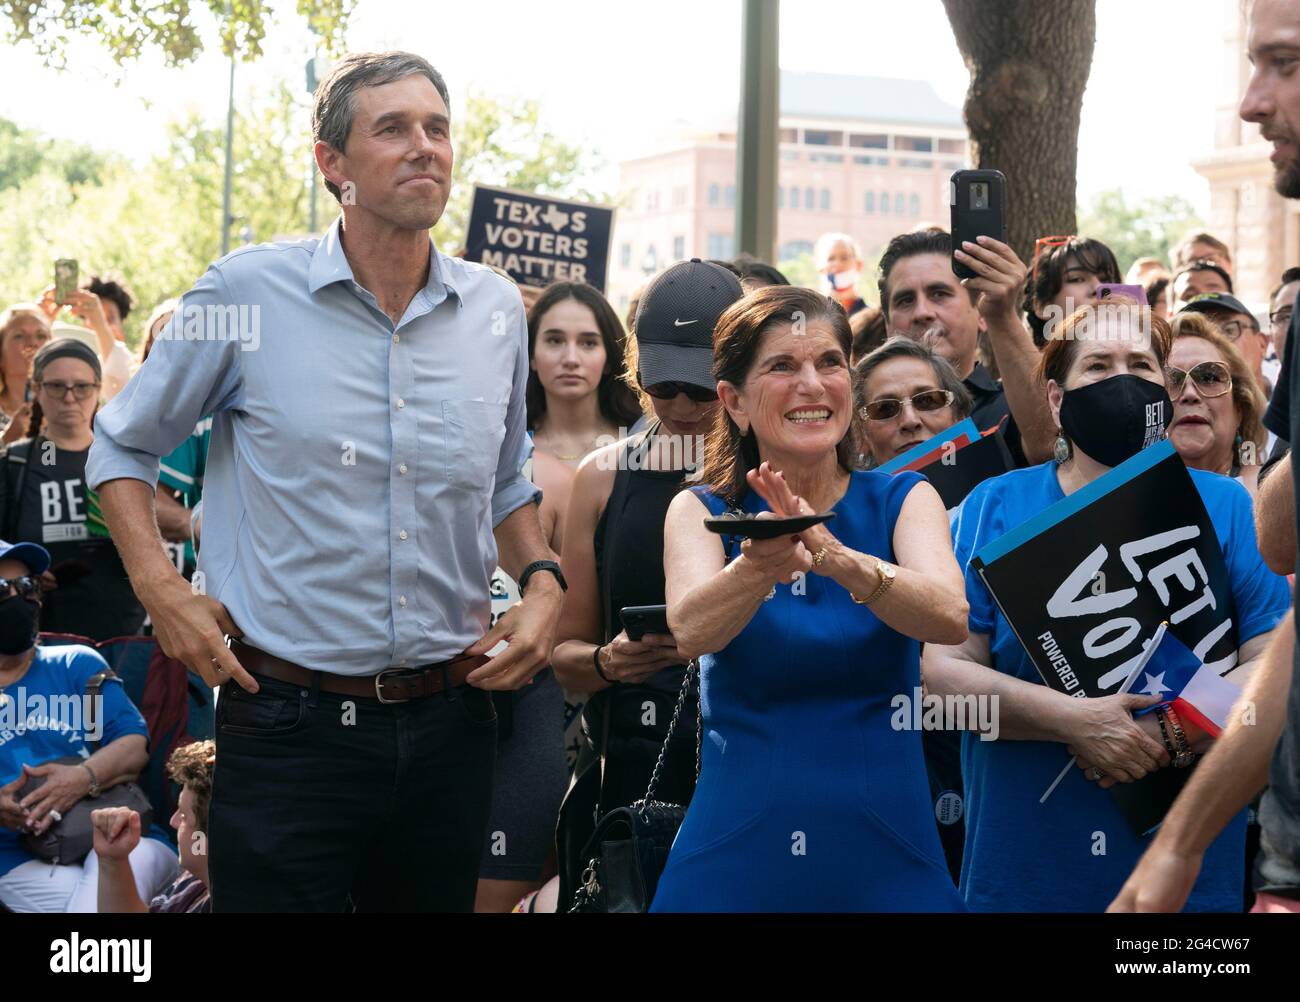 Austin, Texas, USA. 20th June, 2021. Almost a thousand Texas Democrats, including BETO O'ROUKE (l) and LUCI BAINES JOHNSON rally at the State Capitol supporting voting rights bills stalled in Congress and decrying Republican efforts to thwart voter registration and access to the polls. Johnson's father, Lyndon Baines Johnson, signed the Voting Rights Act in 1965. Credit: Bob Daemmrich/Alamy Live News Stock Photo